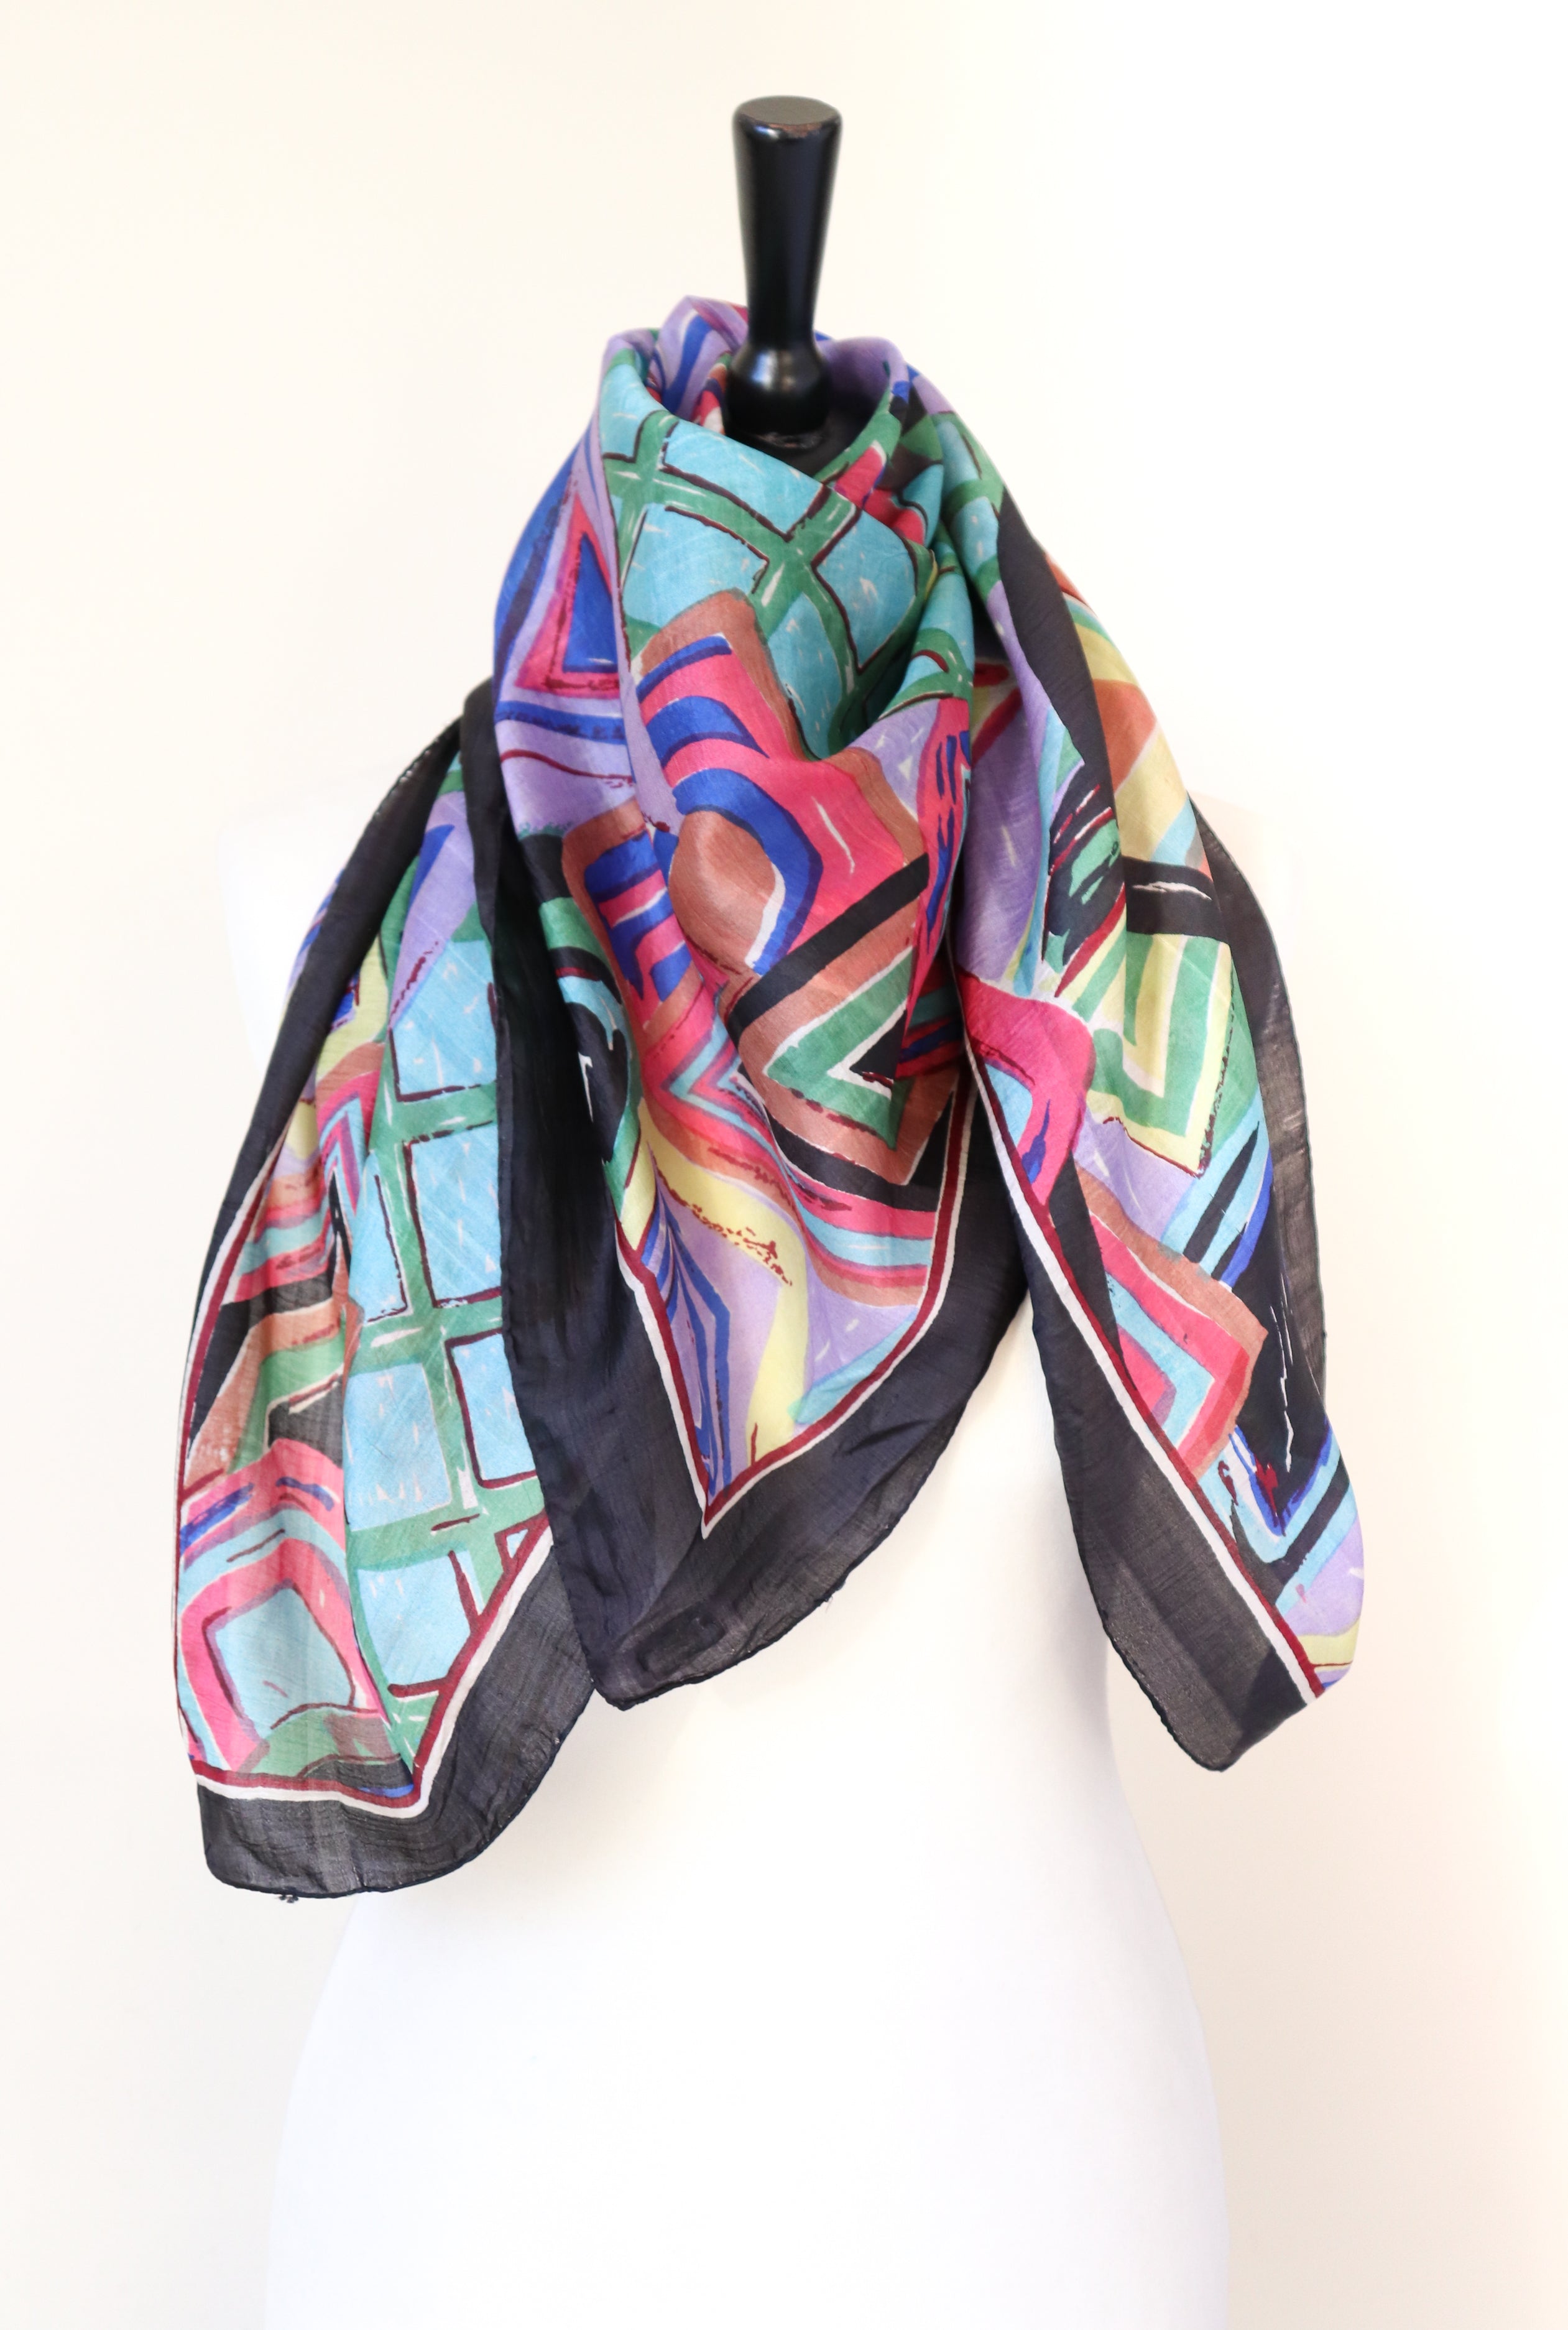 Indian Silk Scarf 1980s Vintage Scarf - Multicolour Art Pattern - X Large